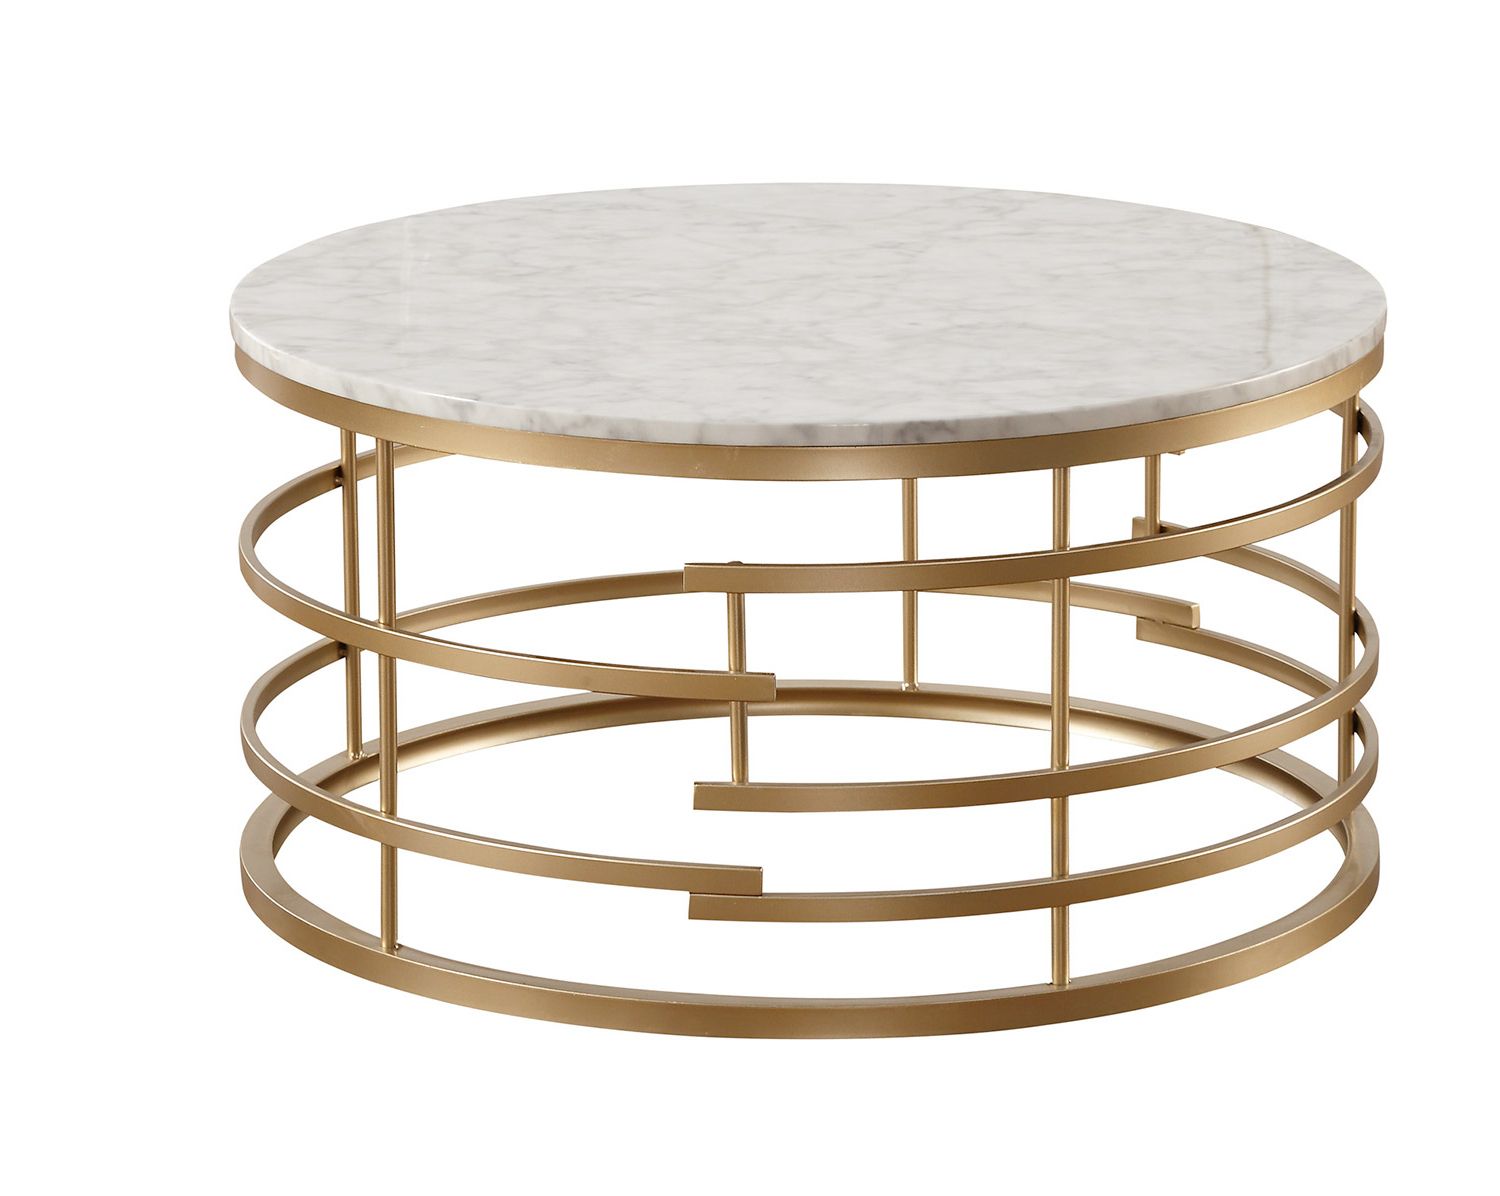 Homelegance Brassica Round Cocktail/coffee Table With Faux Within 2019 Faux White Marble And Metal Coffee Tables (View 15 of 20)